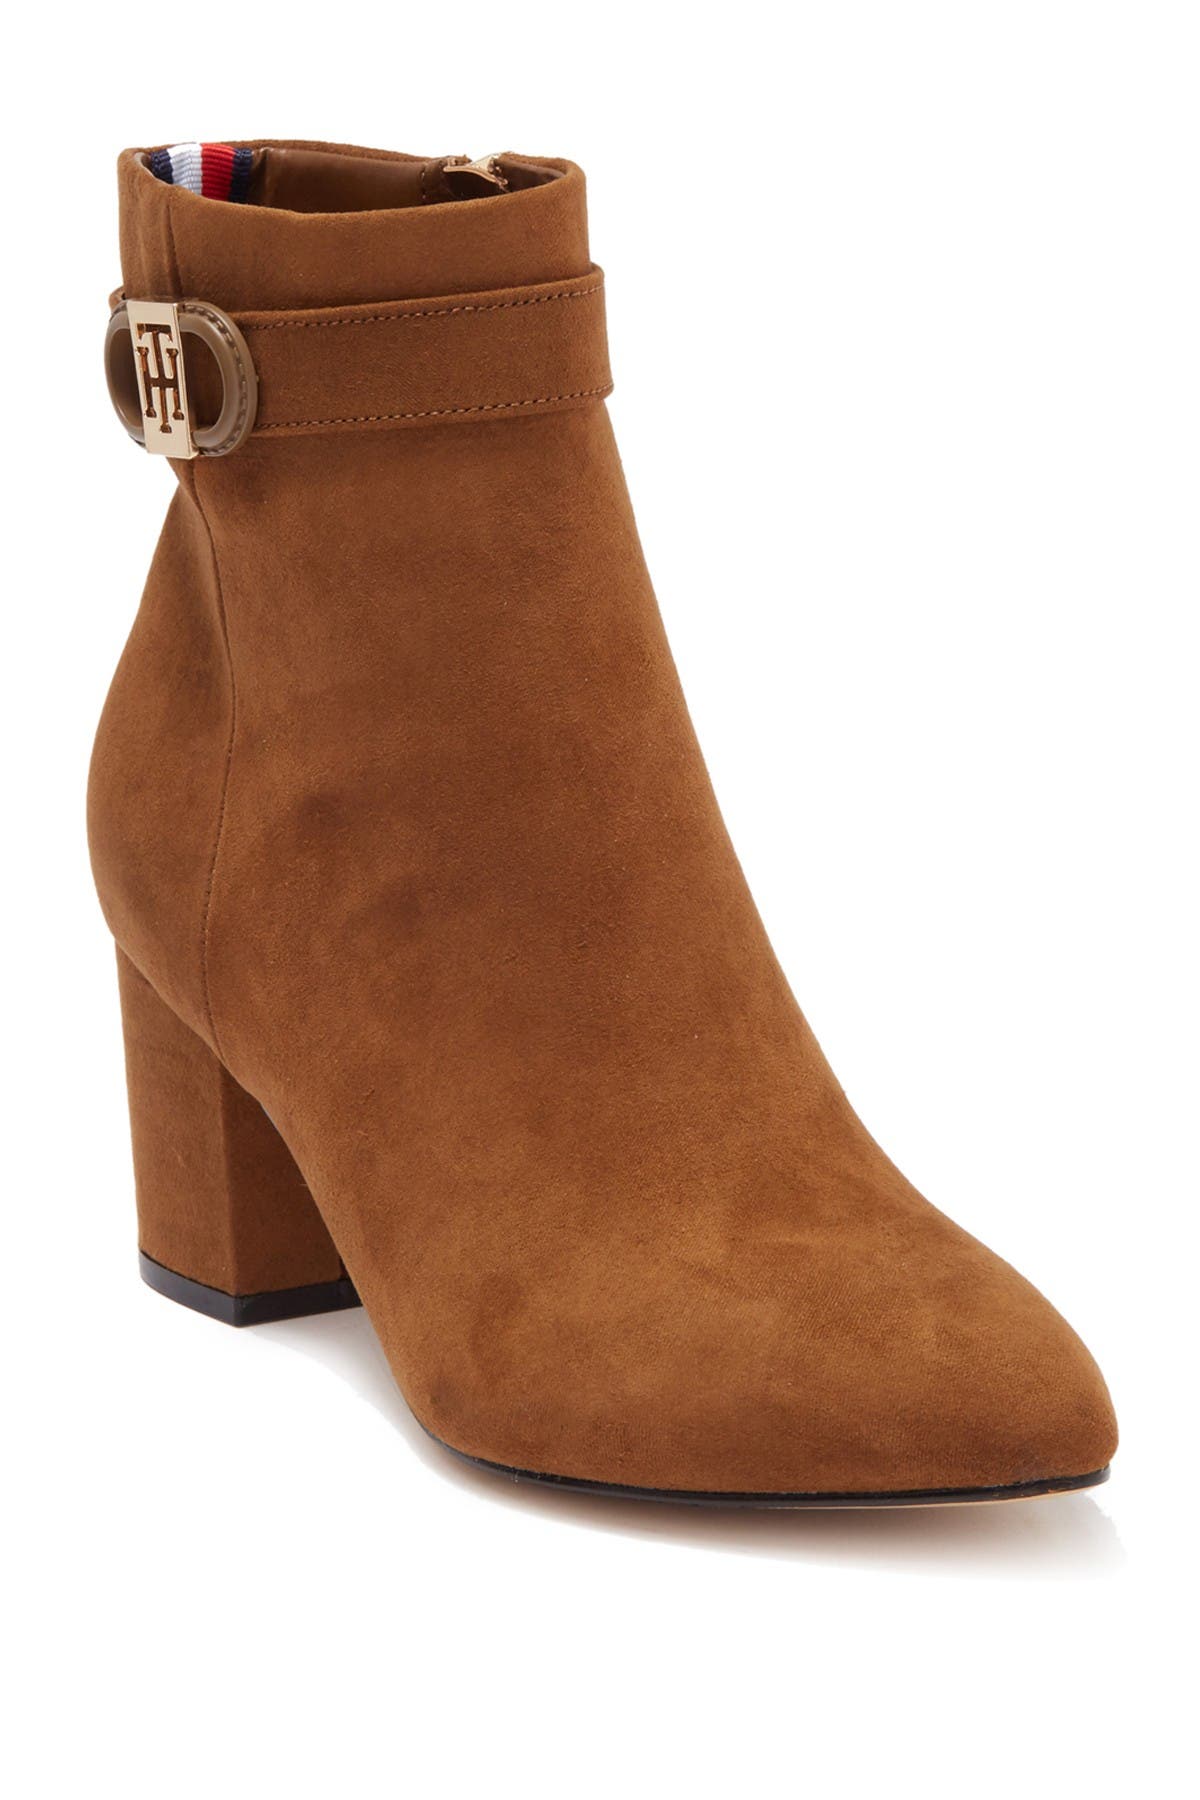 tommy hilfiger suede booties